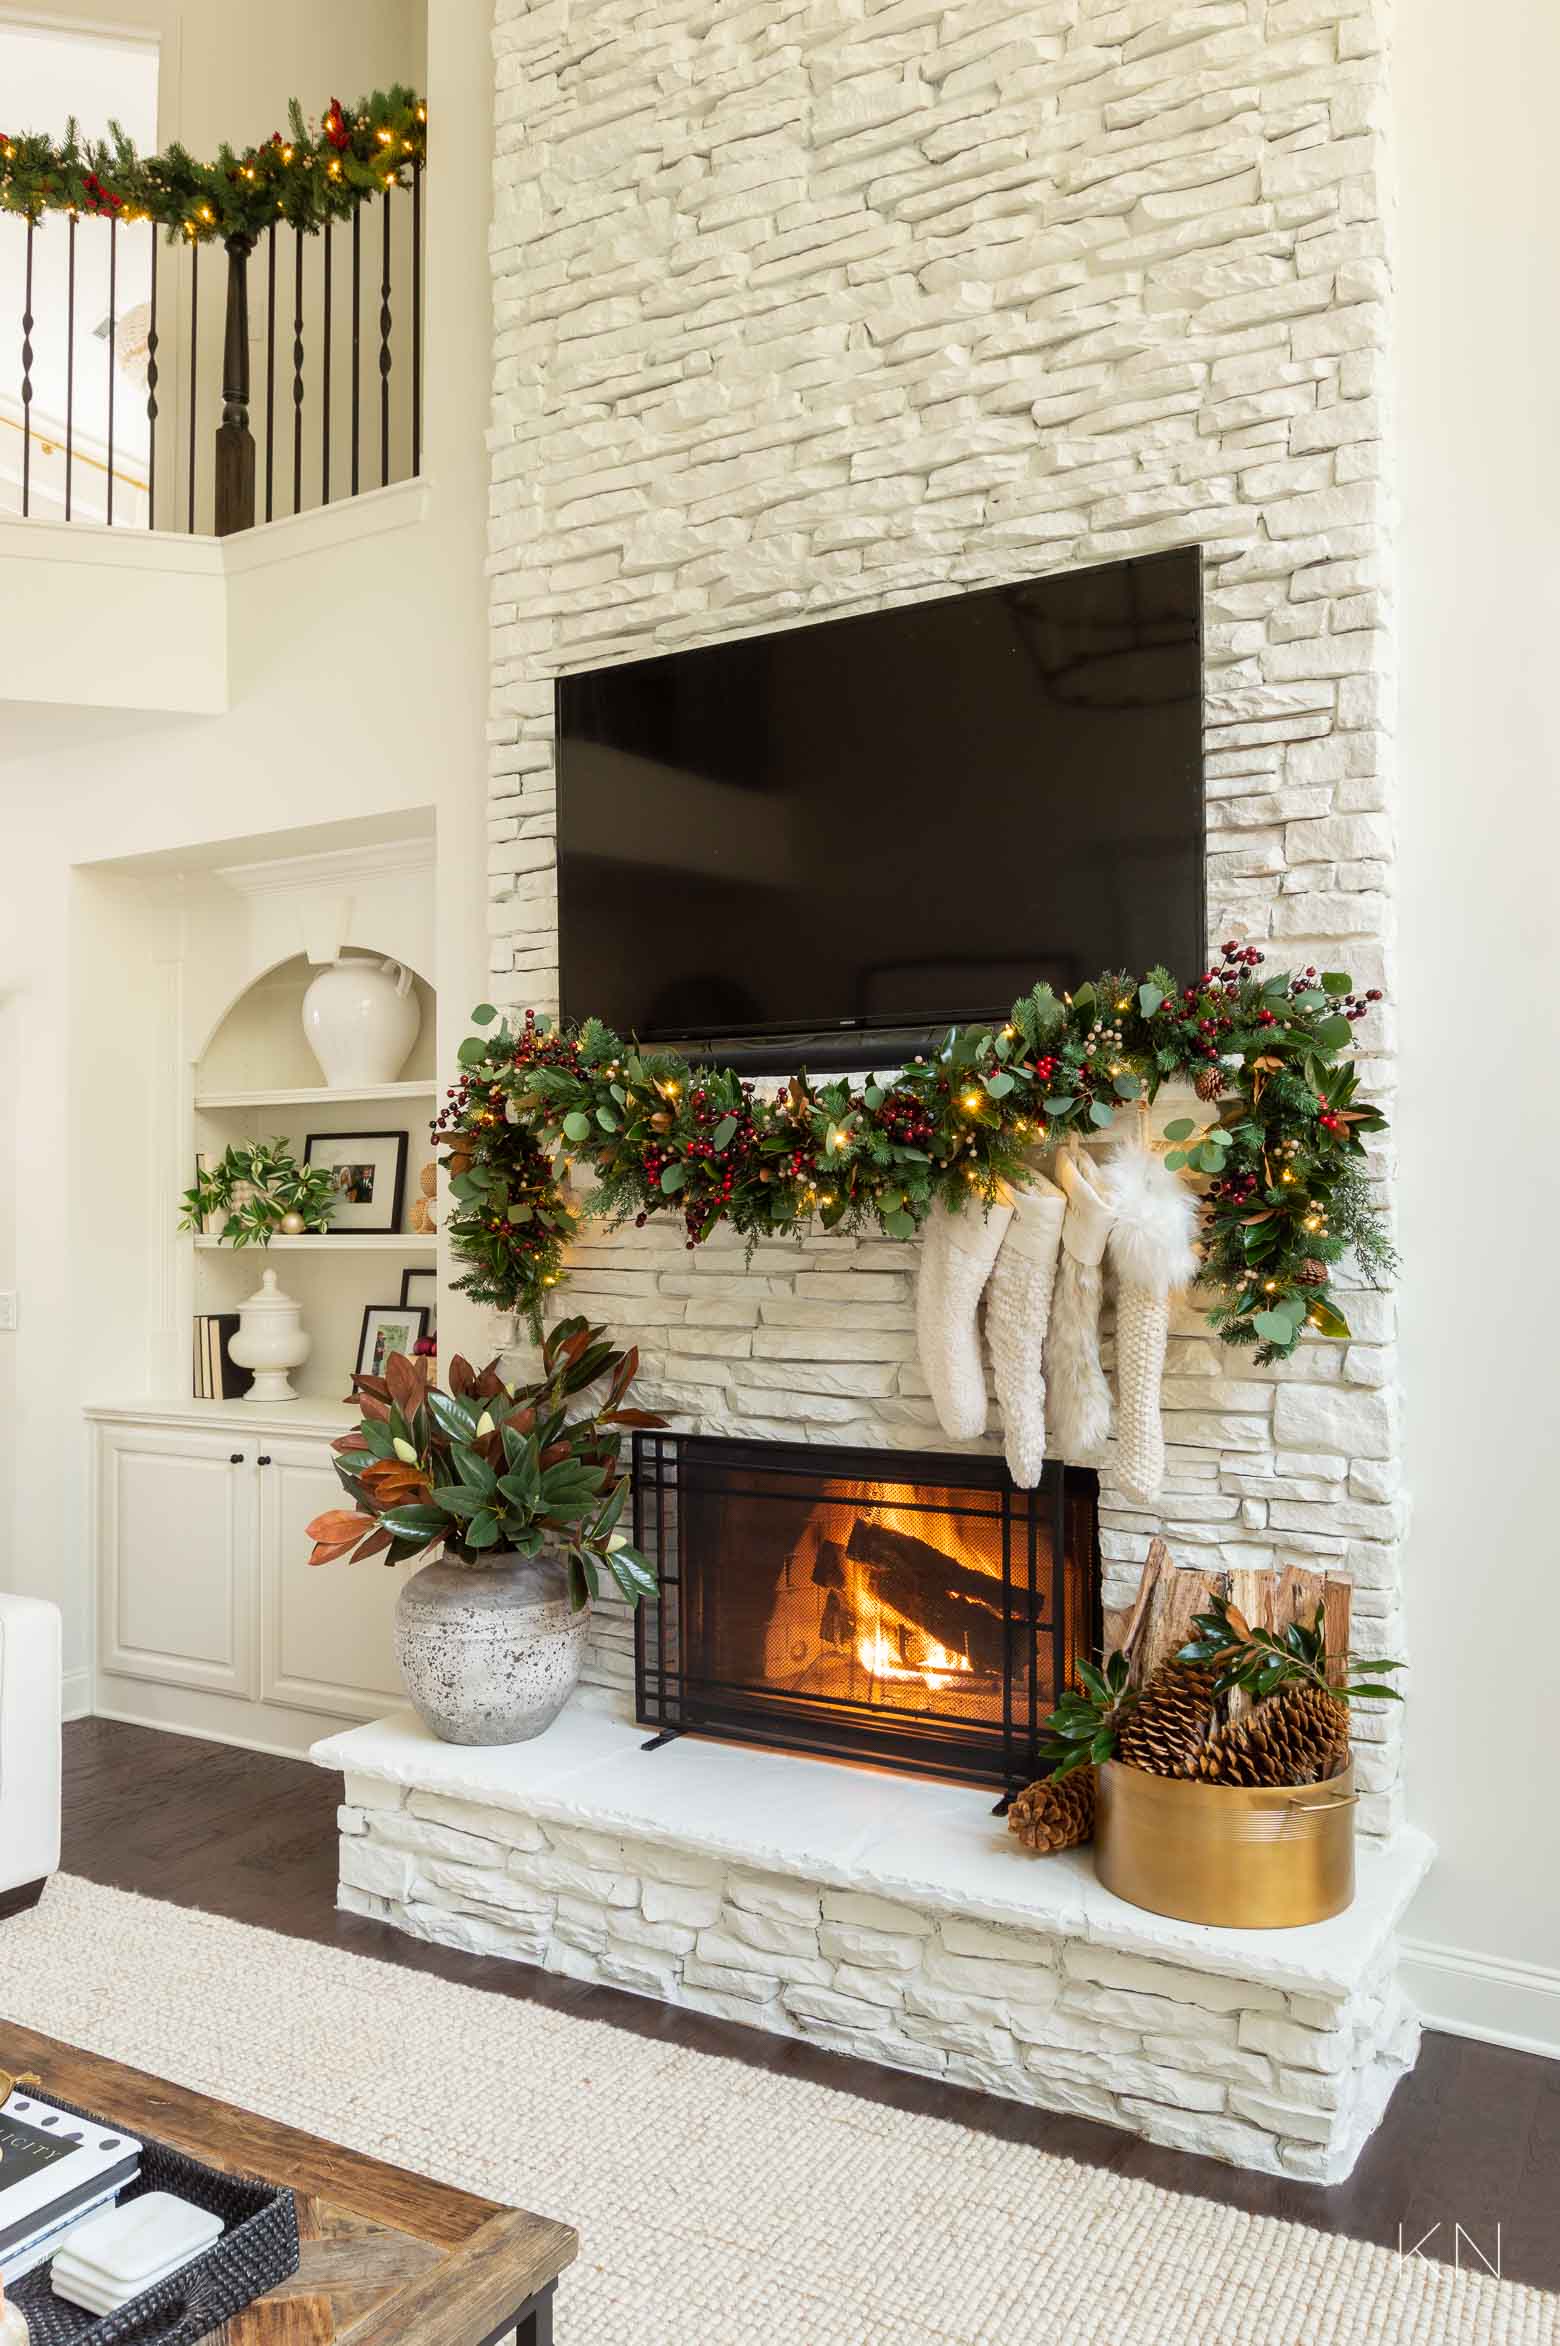 White Stone Fireplace Christmas Decor -- Green Garland with Red Berries and White Stockings